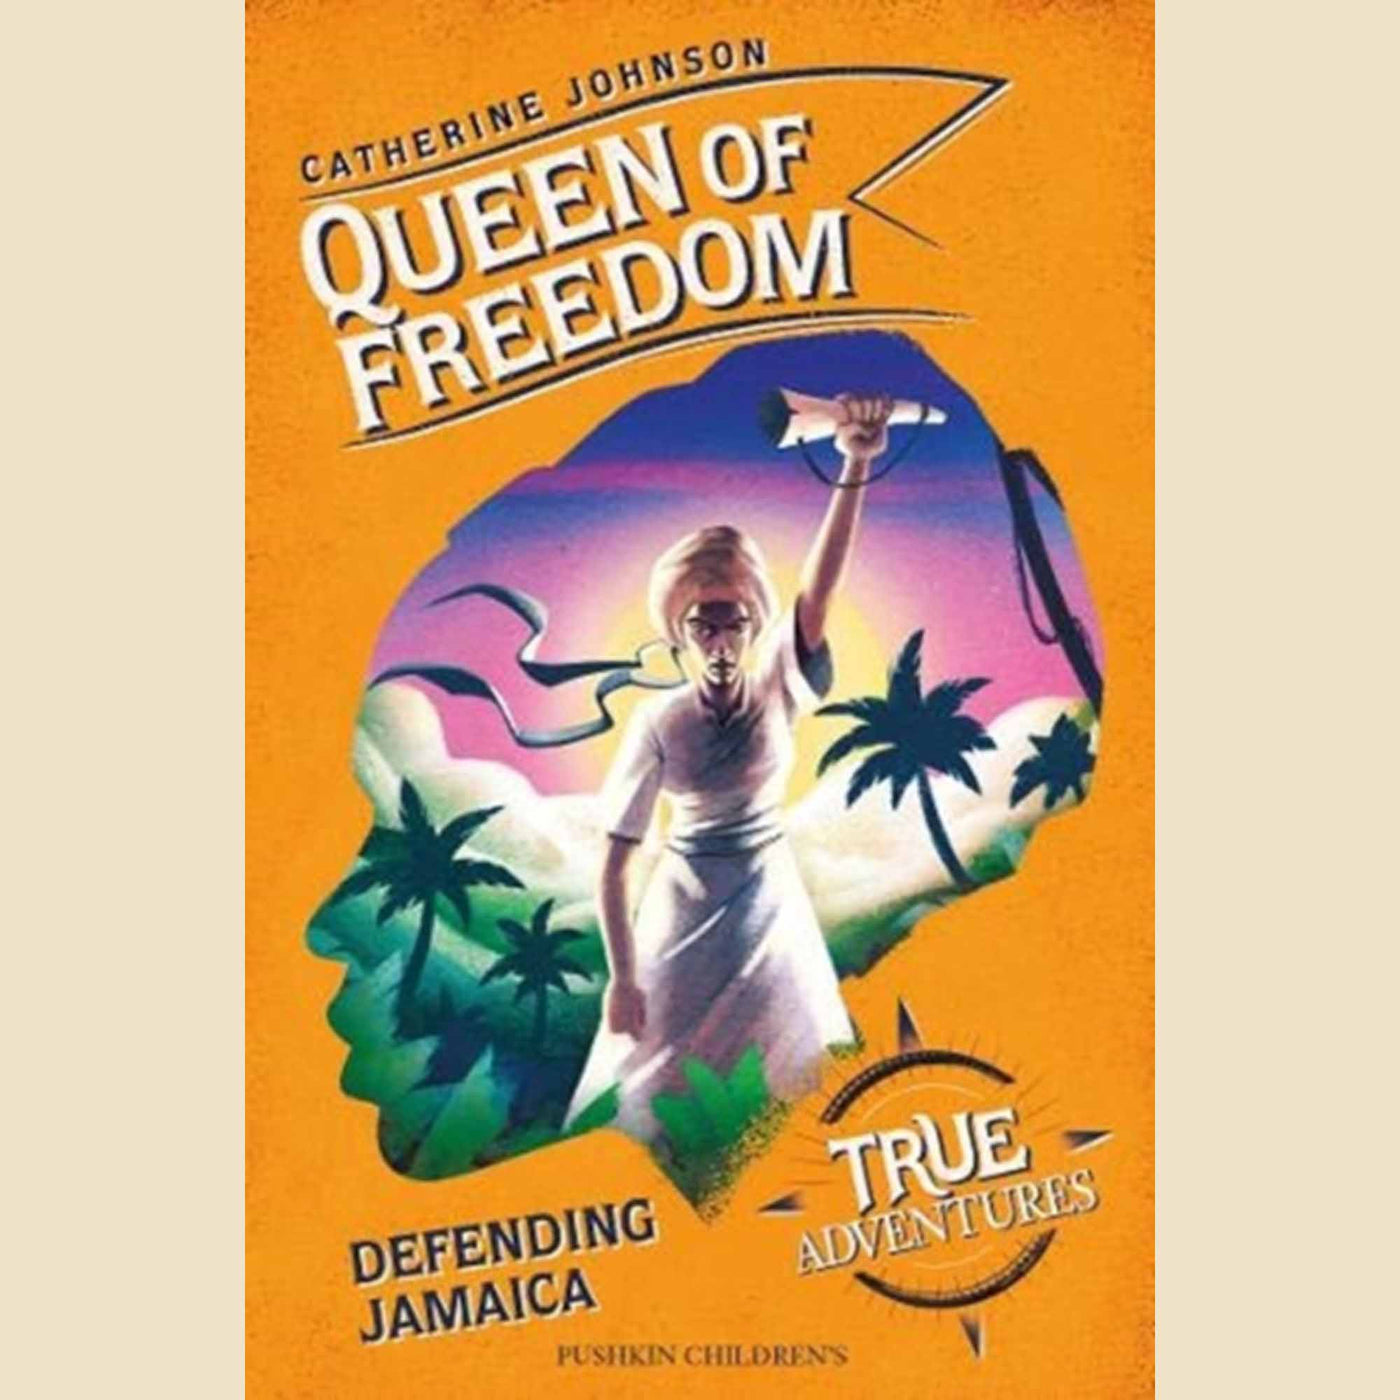 Queen of Freedom  by Catherine Johnson